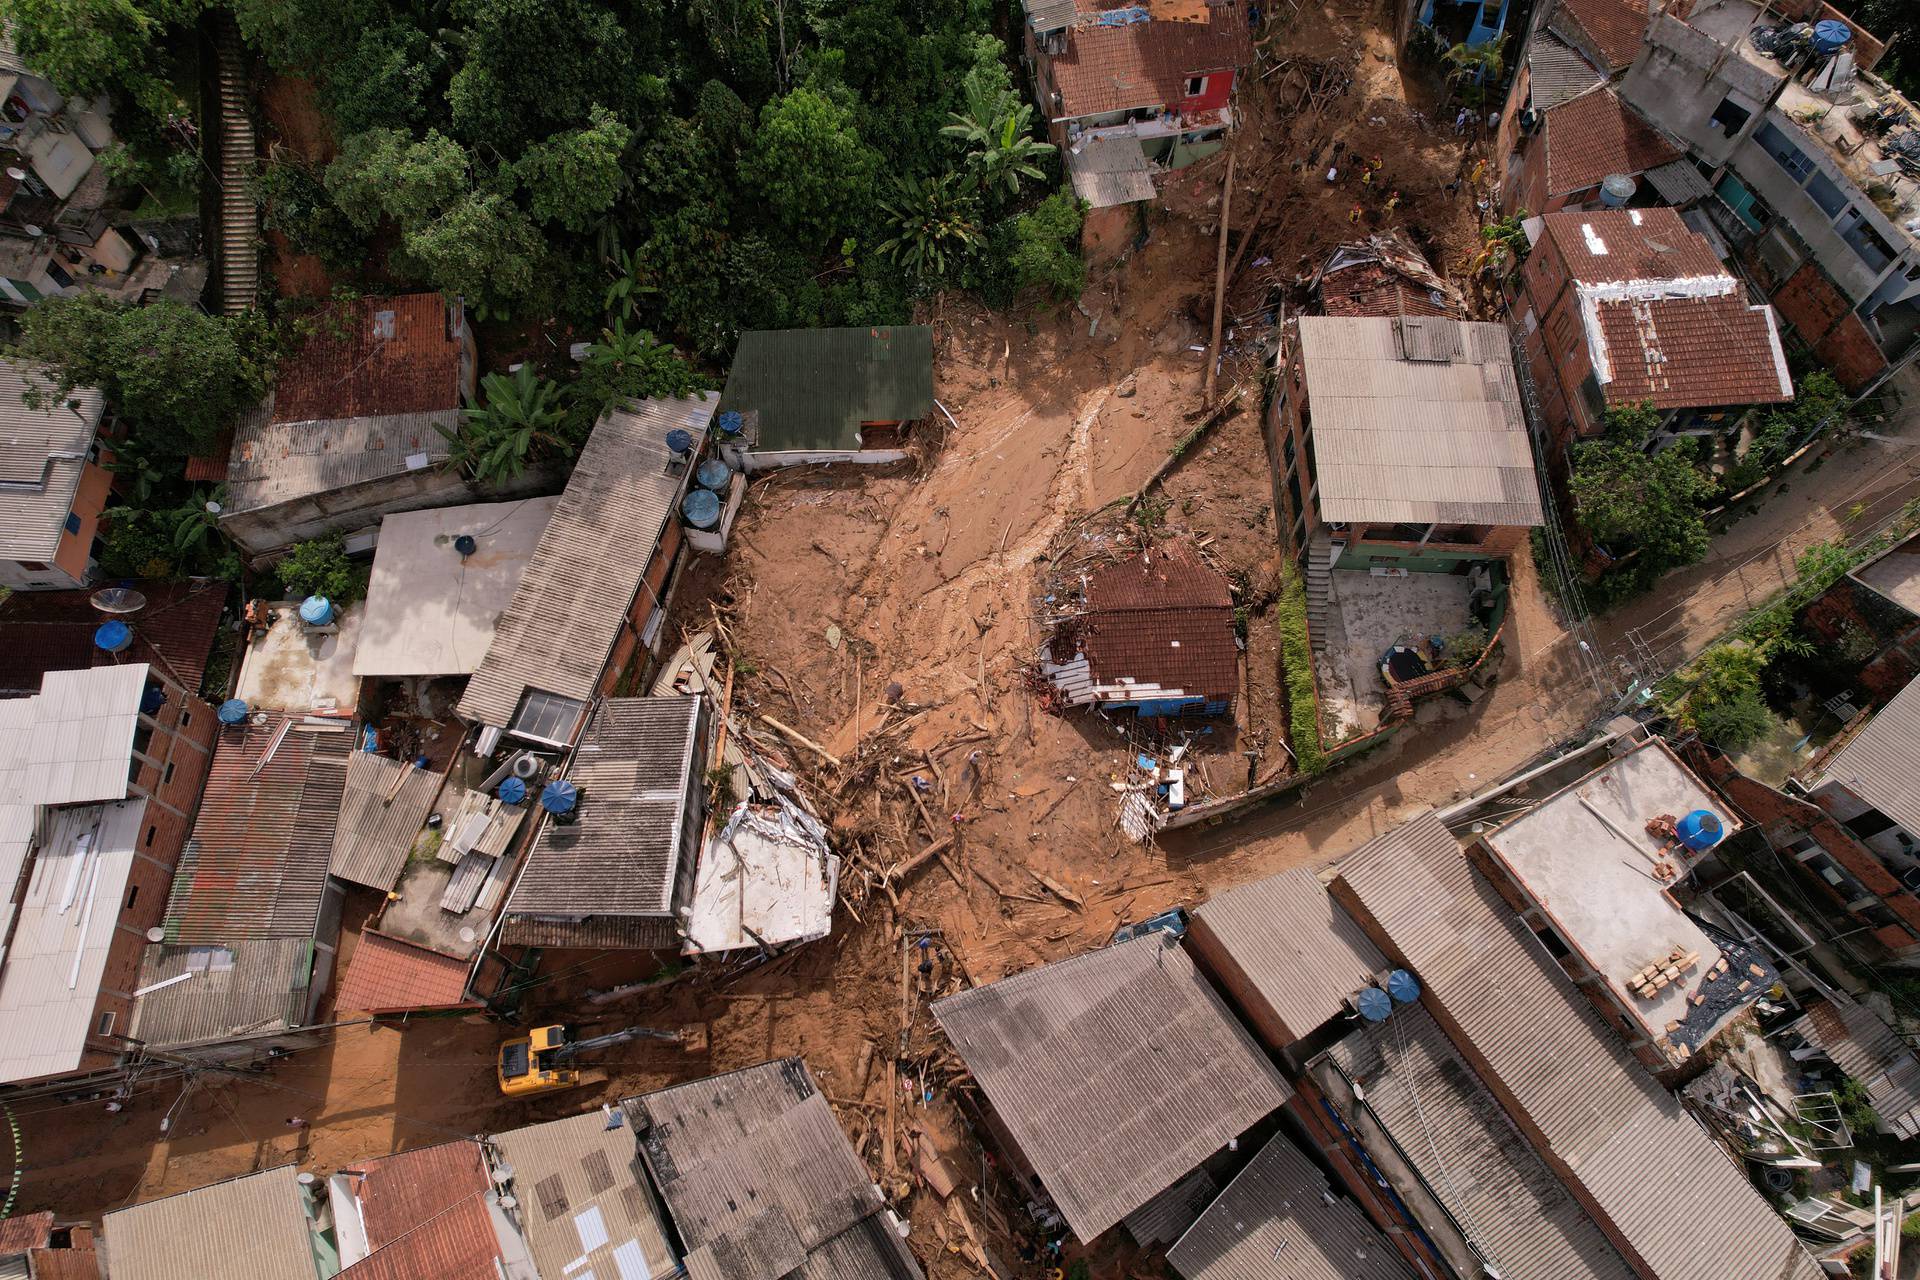 Aftermath of the severe rainfall that caused landslides in Sao Sebastiao